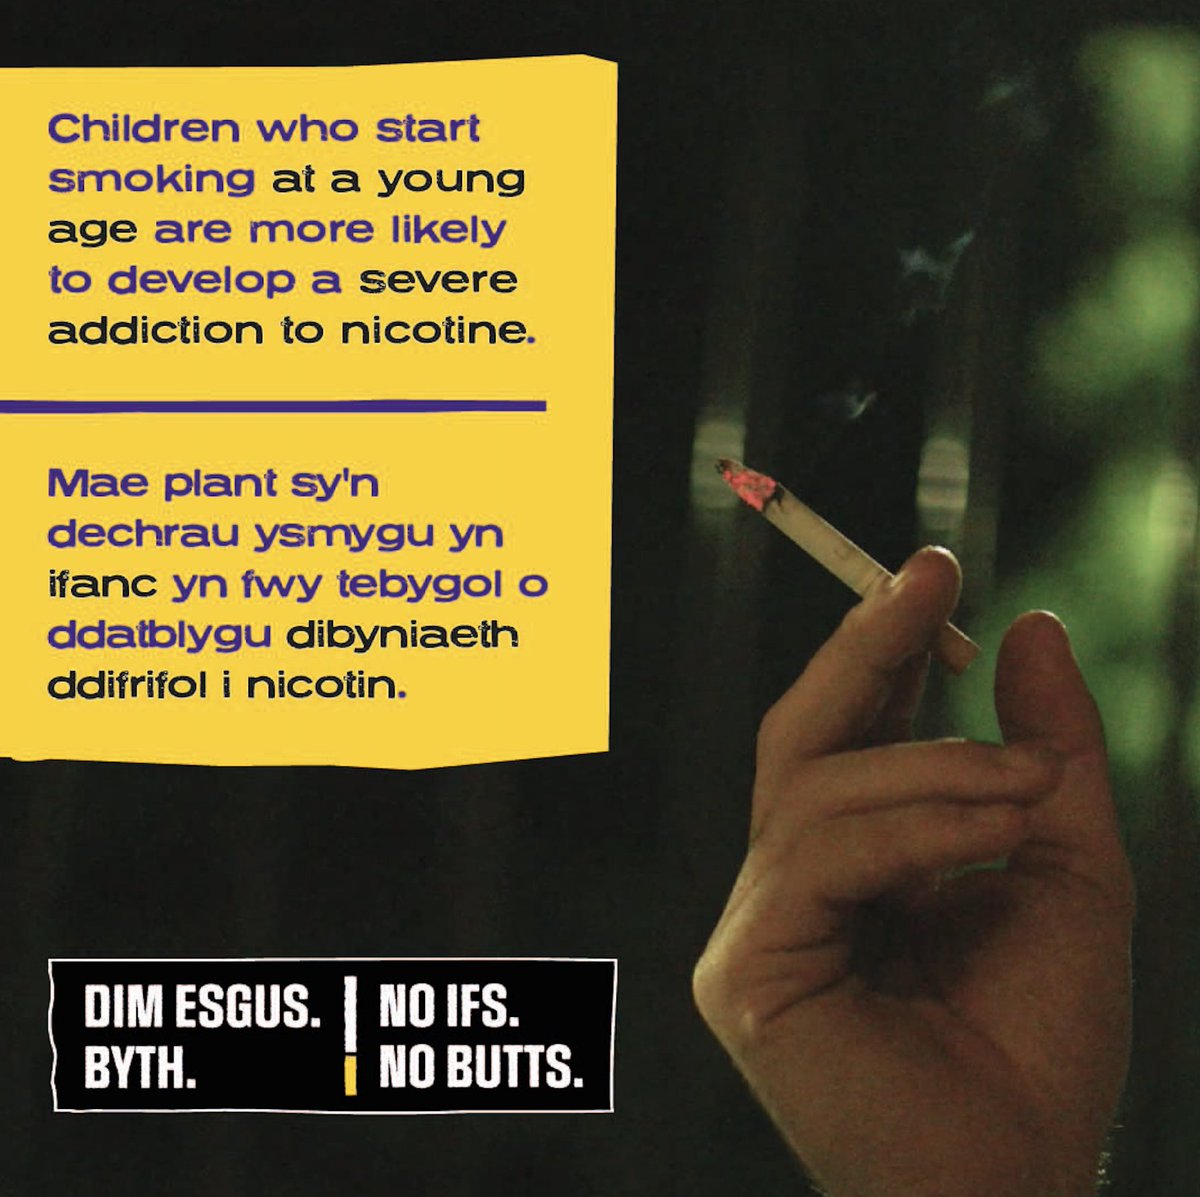 Cheap cigarettes allow children to smoke easily which can lead to a severe addiction and increase risk of illnesses. 

Do you know where they're being sold? 

Report anonymously here: noifs-nobutts.co.uk/report-illegal…

#noifsnobuttswales #noifsnobutts #illegaltobacco #illegalcigarettes